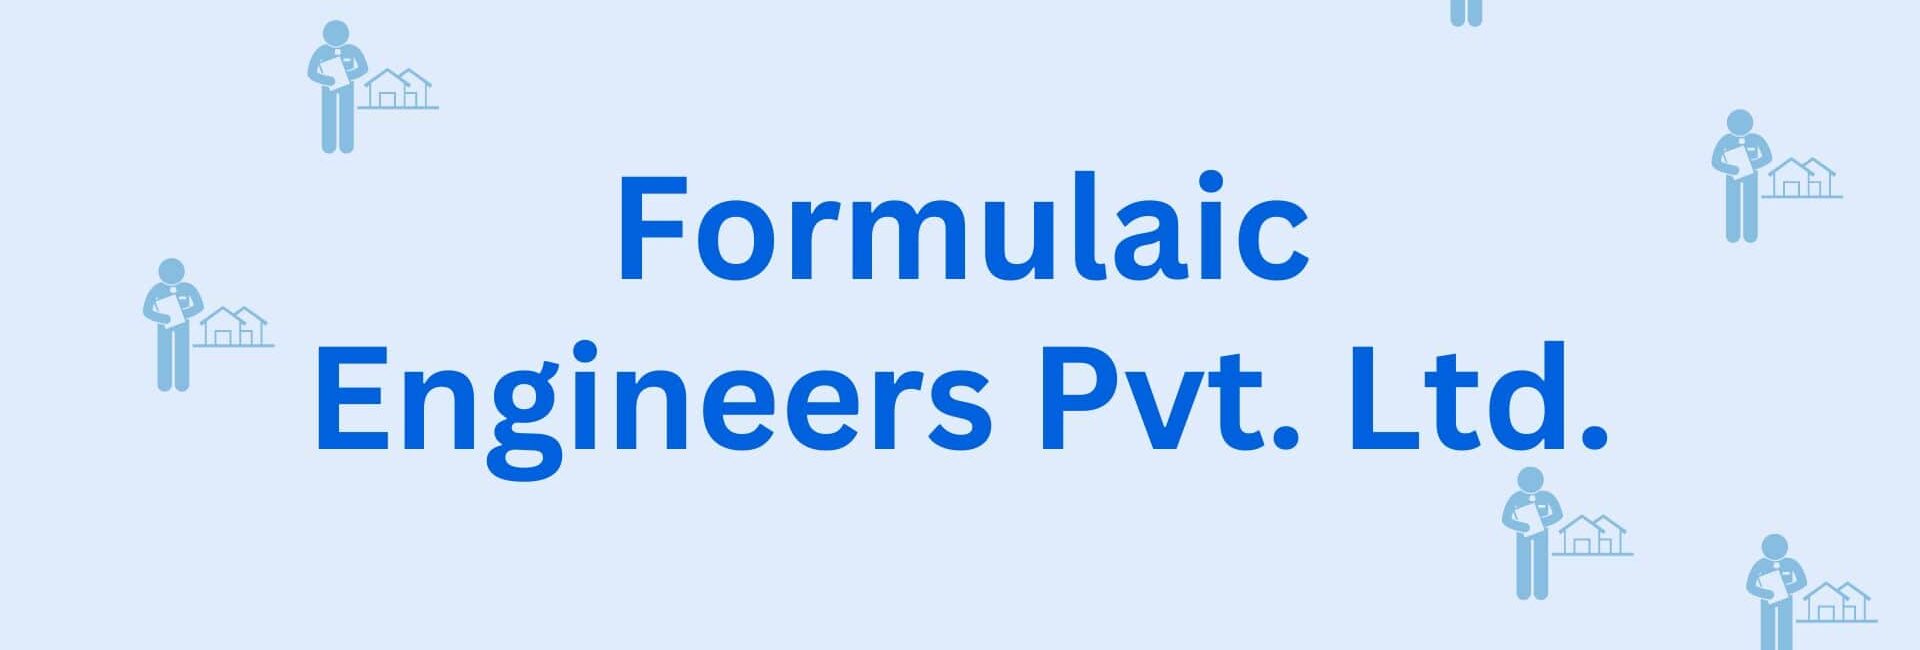 Formulaic Engineers Pvt. Ltd. - Property Valuer in Hisar